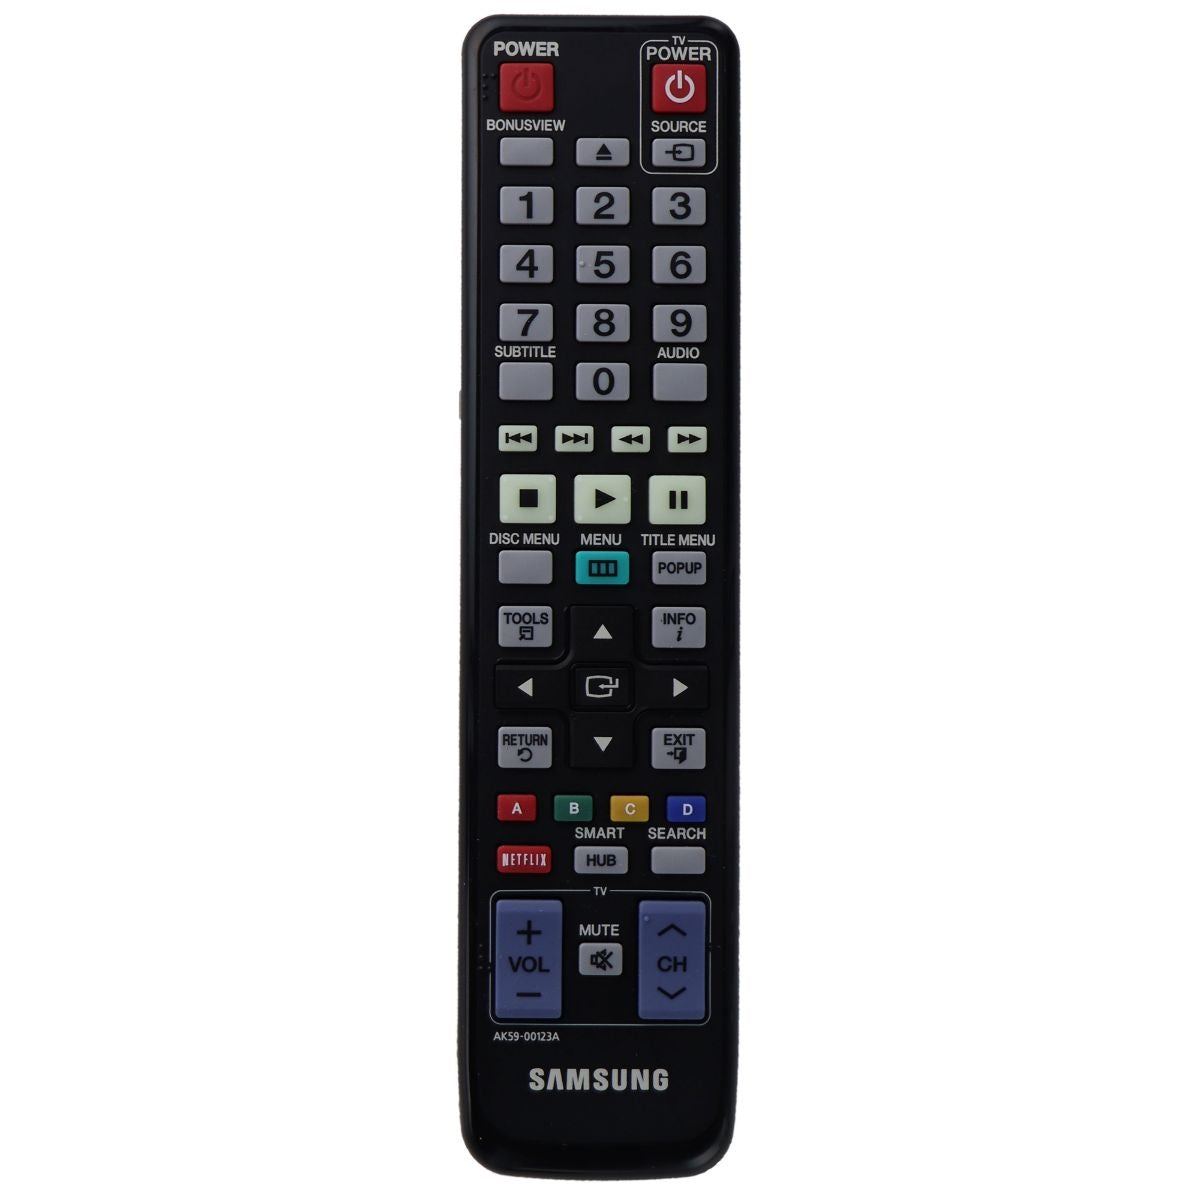 Samsung Remote Control (AK59-00123A) for Select Samsung Blu-Ray Players - Black TV, Video & Audio Accessories - Remote Controls Samsung    - Simple Cell Bulk Wholesale Pricing - USA Seller